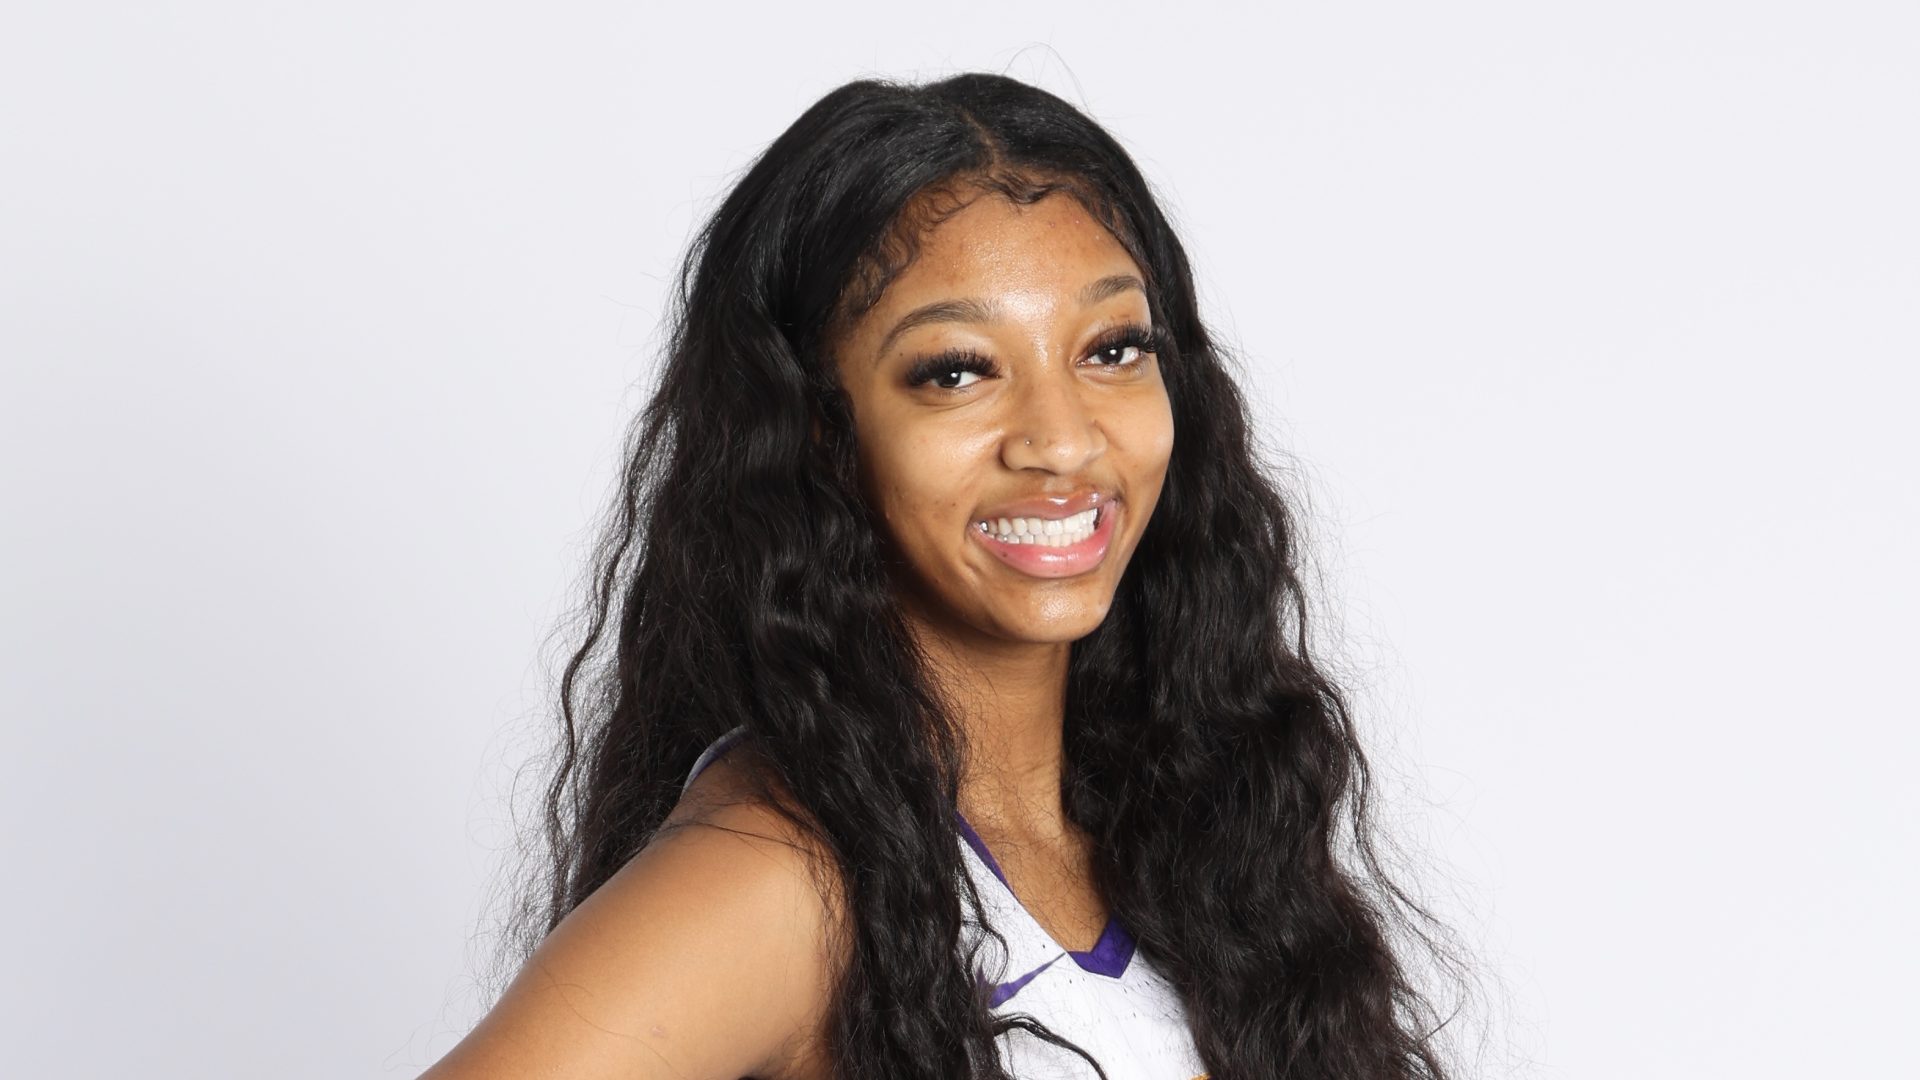 DALLAS, TX - MARCH 30: Angel Reese #10 of the LSU Lady Tigers during media day at 2023 NCAA Women's Basketball Final Four at the at the Kay Bailey Hutchison Convention Center on March 29, 2023 in Dallas, Texas.